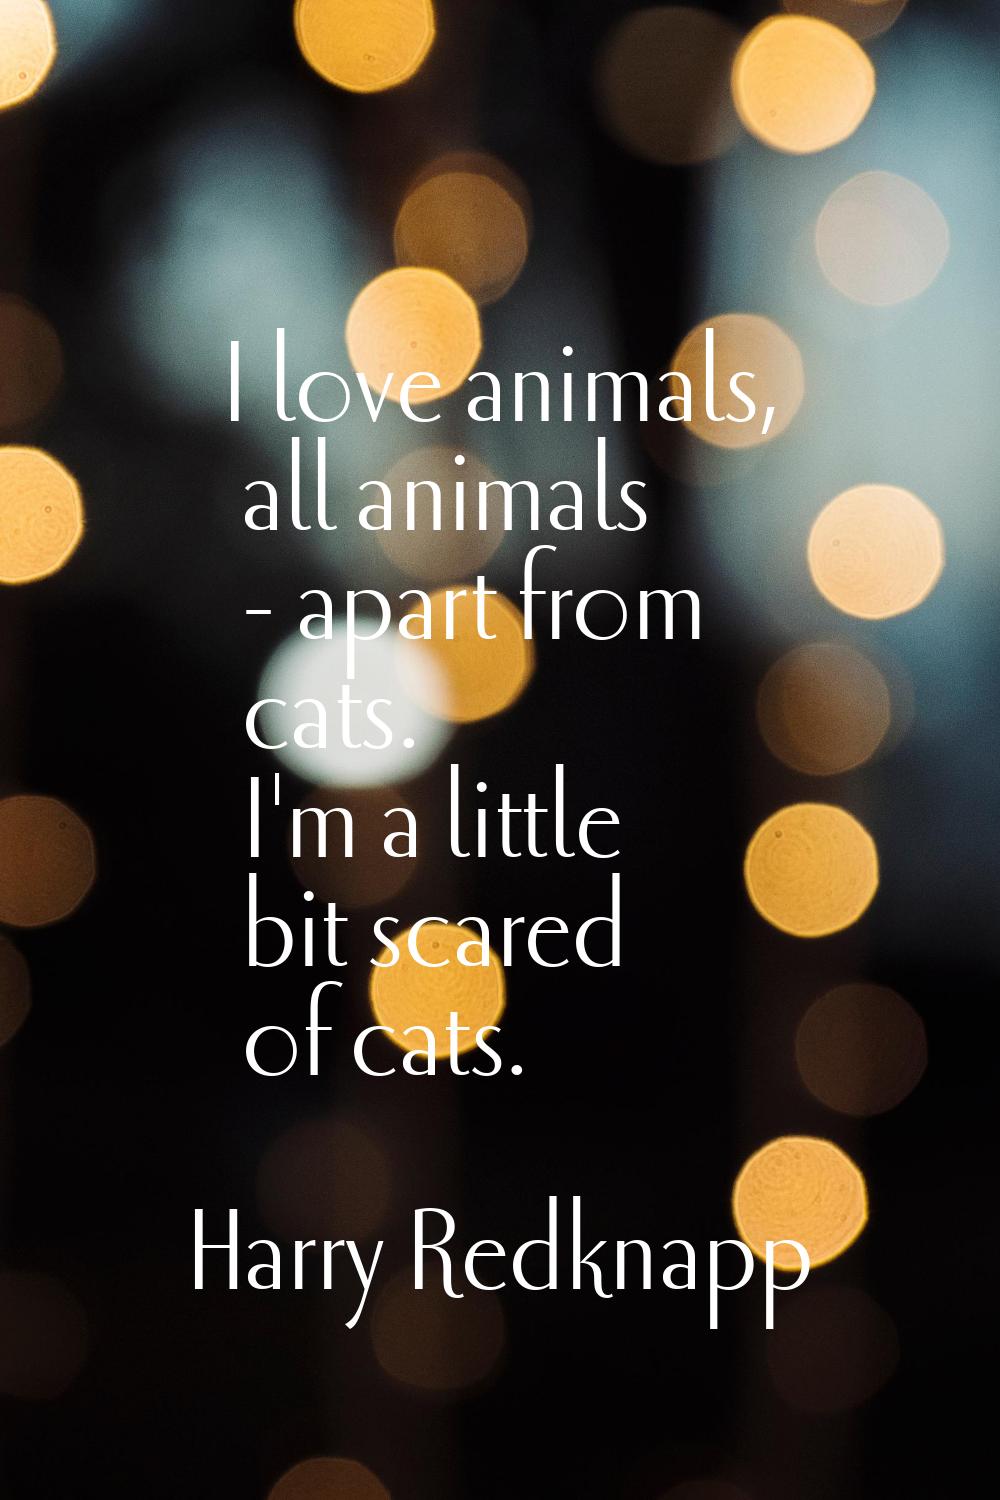 I love animals, all animals - apart from cats. I'm a little bit scared of cats.